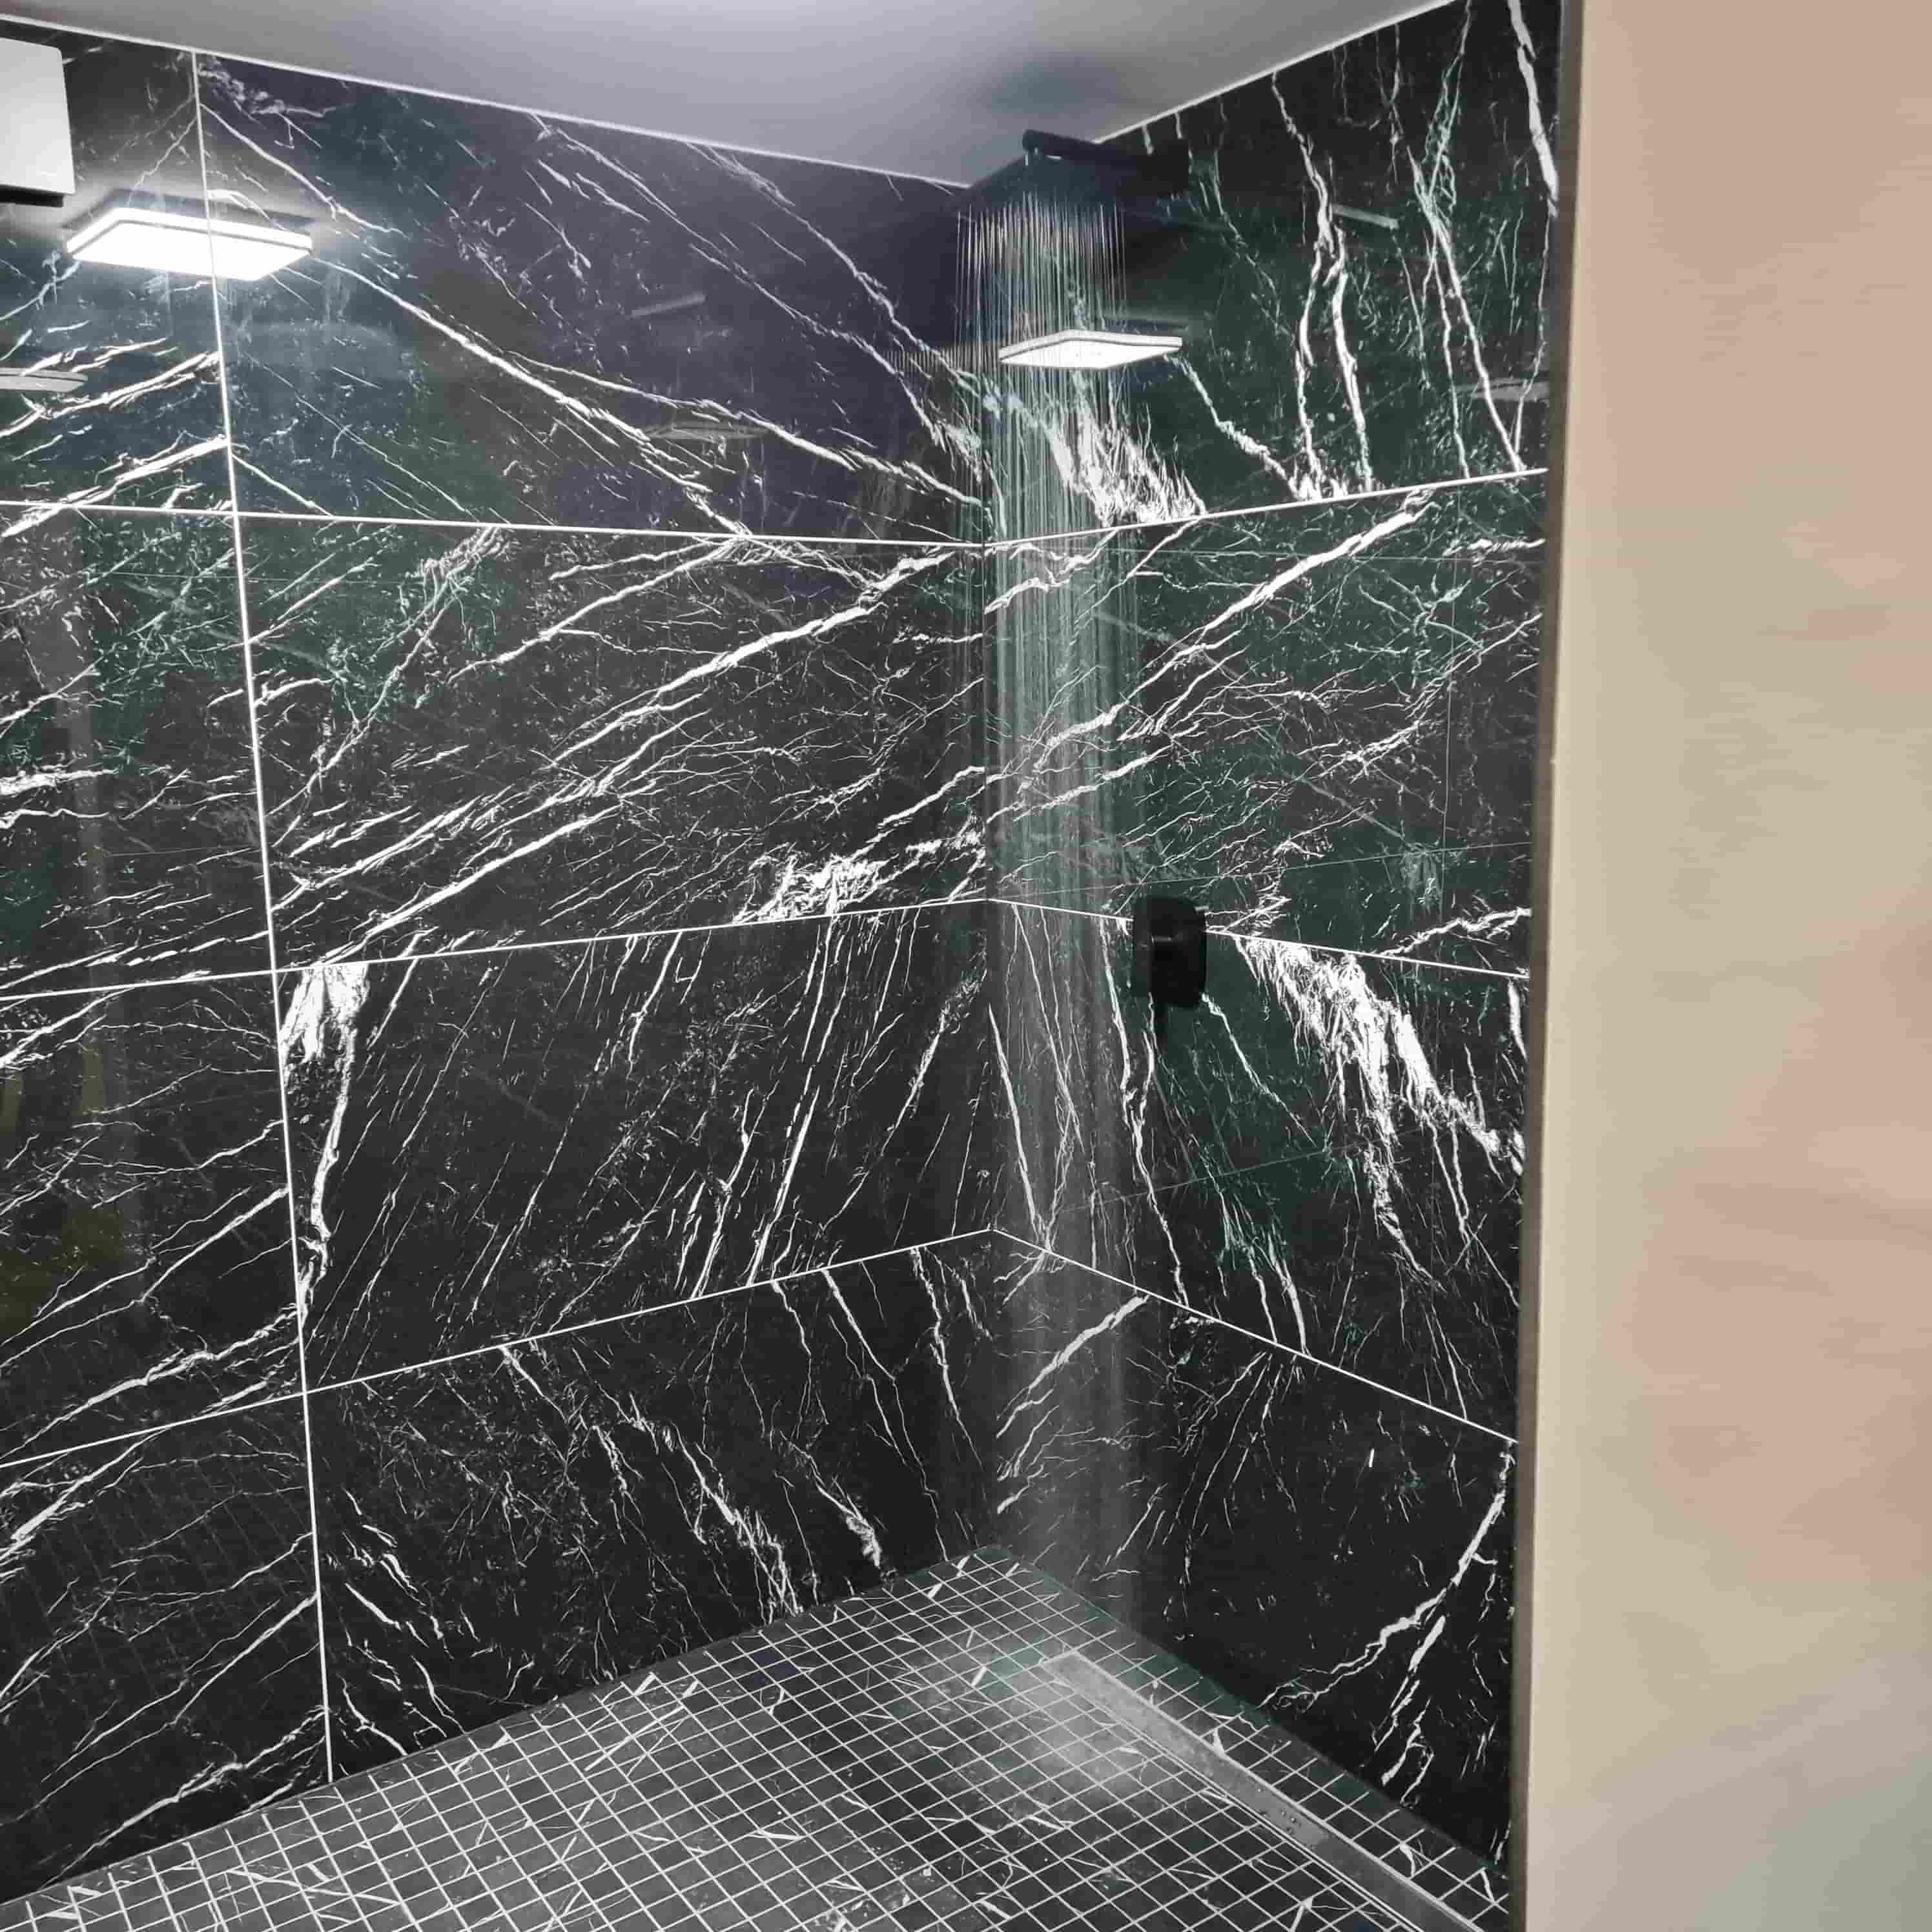 A shower with big black marbletiles